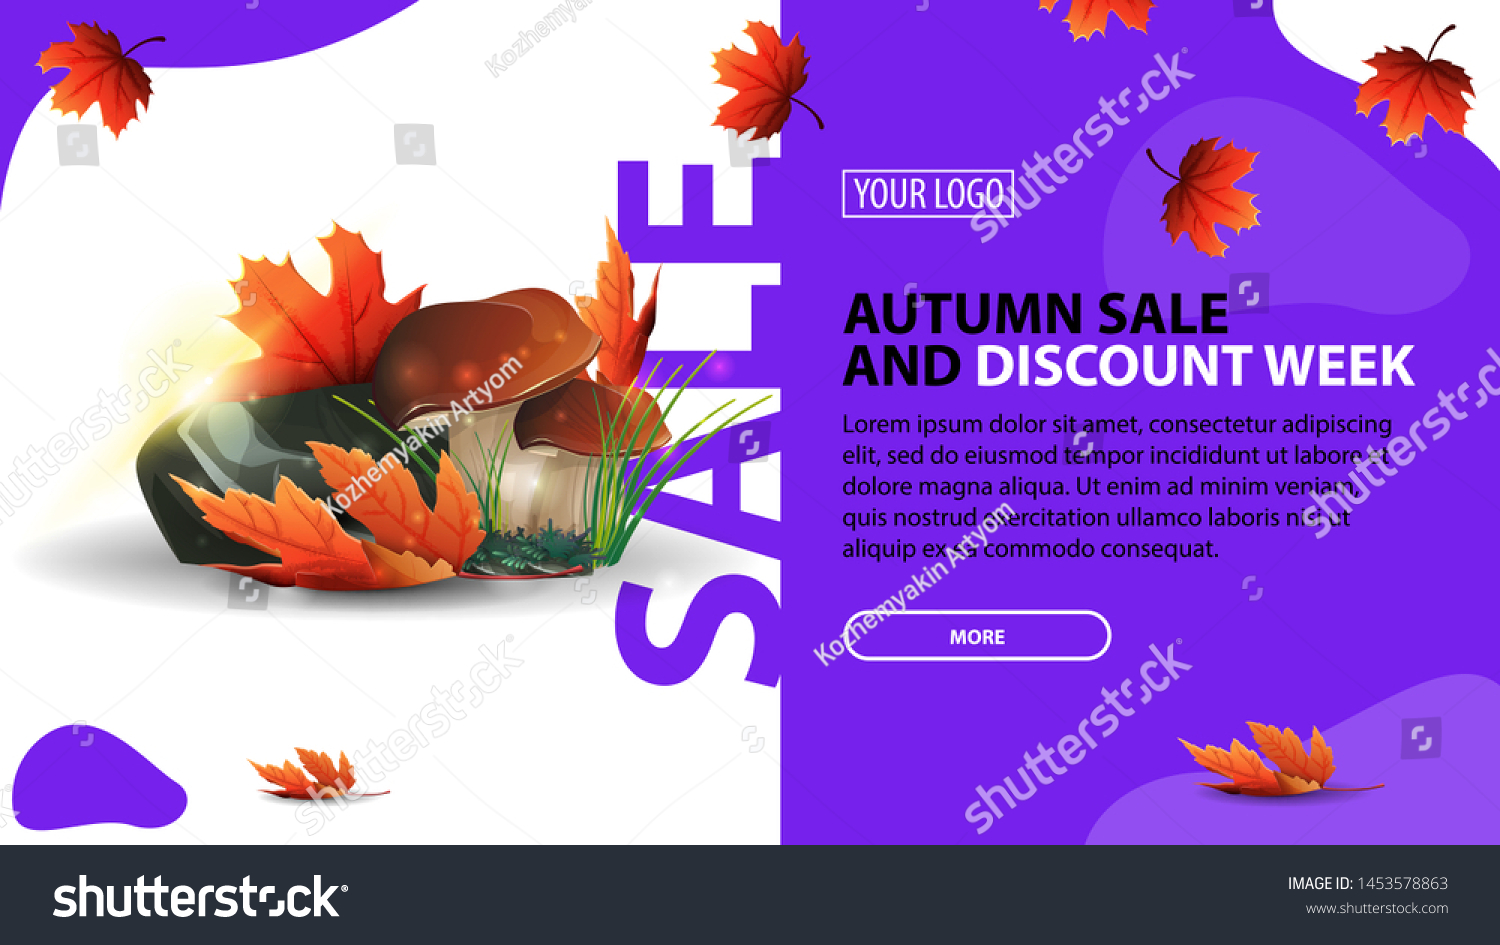 Autumn sale and discount week, horizontal discount banner for your website with modern design, mushrooms and autumn leaves #1453578863